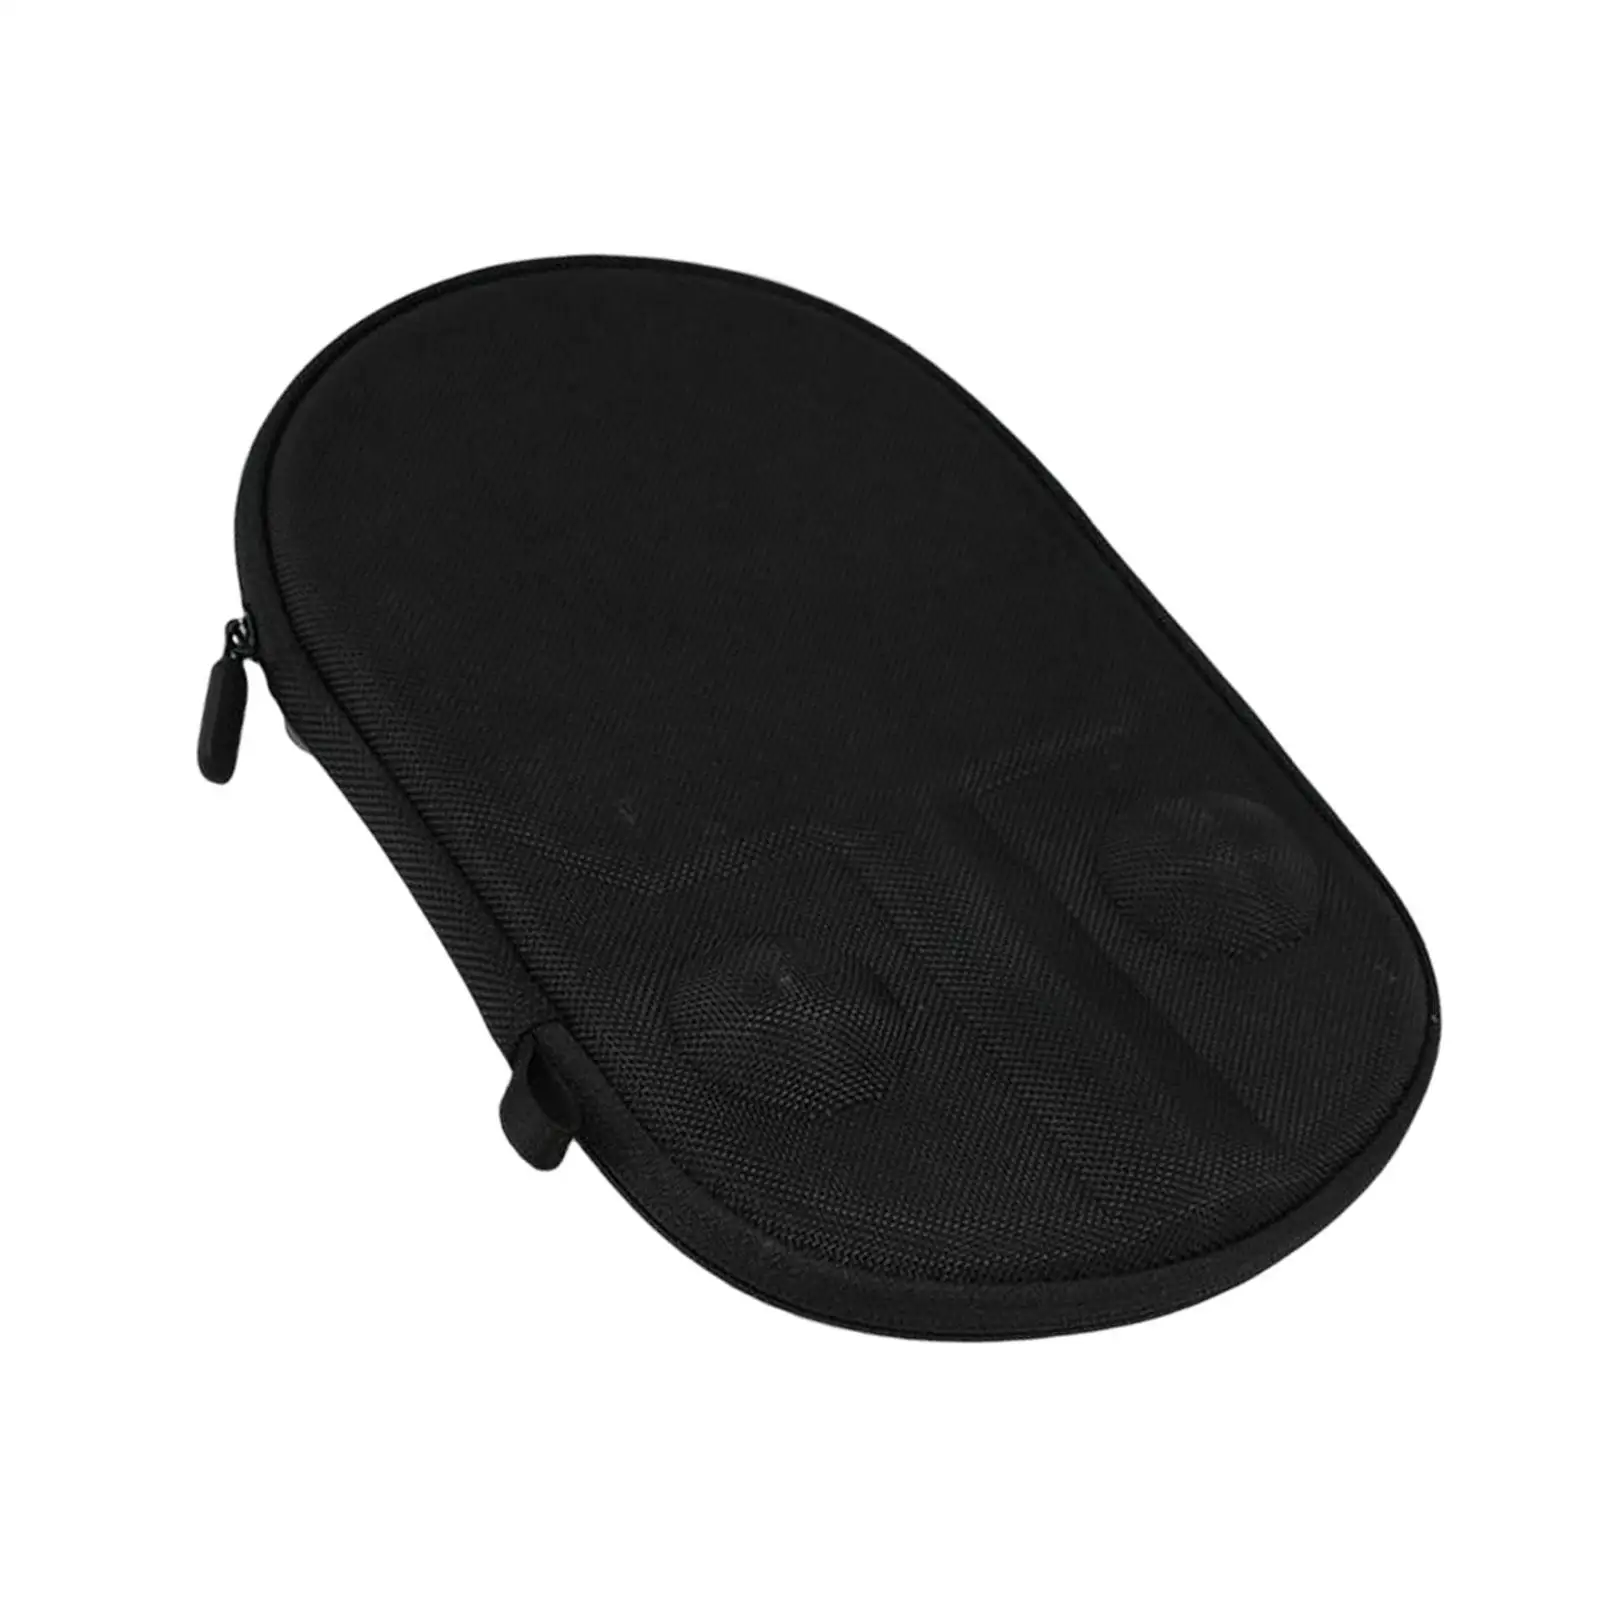 Table Tennis Racket Bag Sturdy Wear Resistant for Indoor Competition Travel